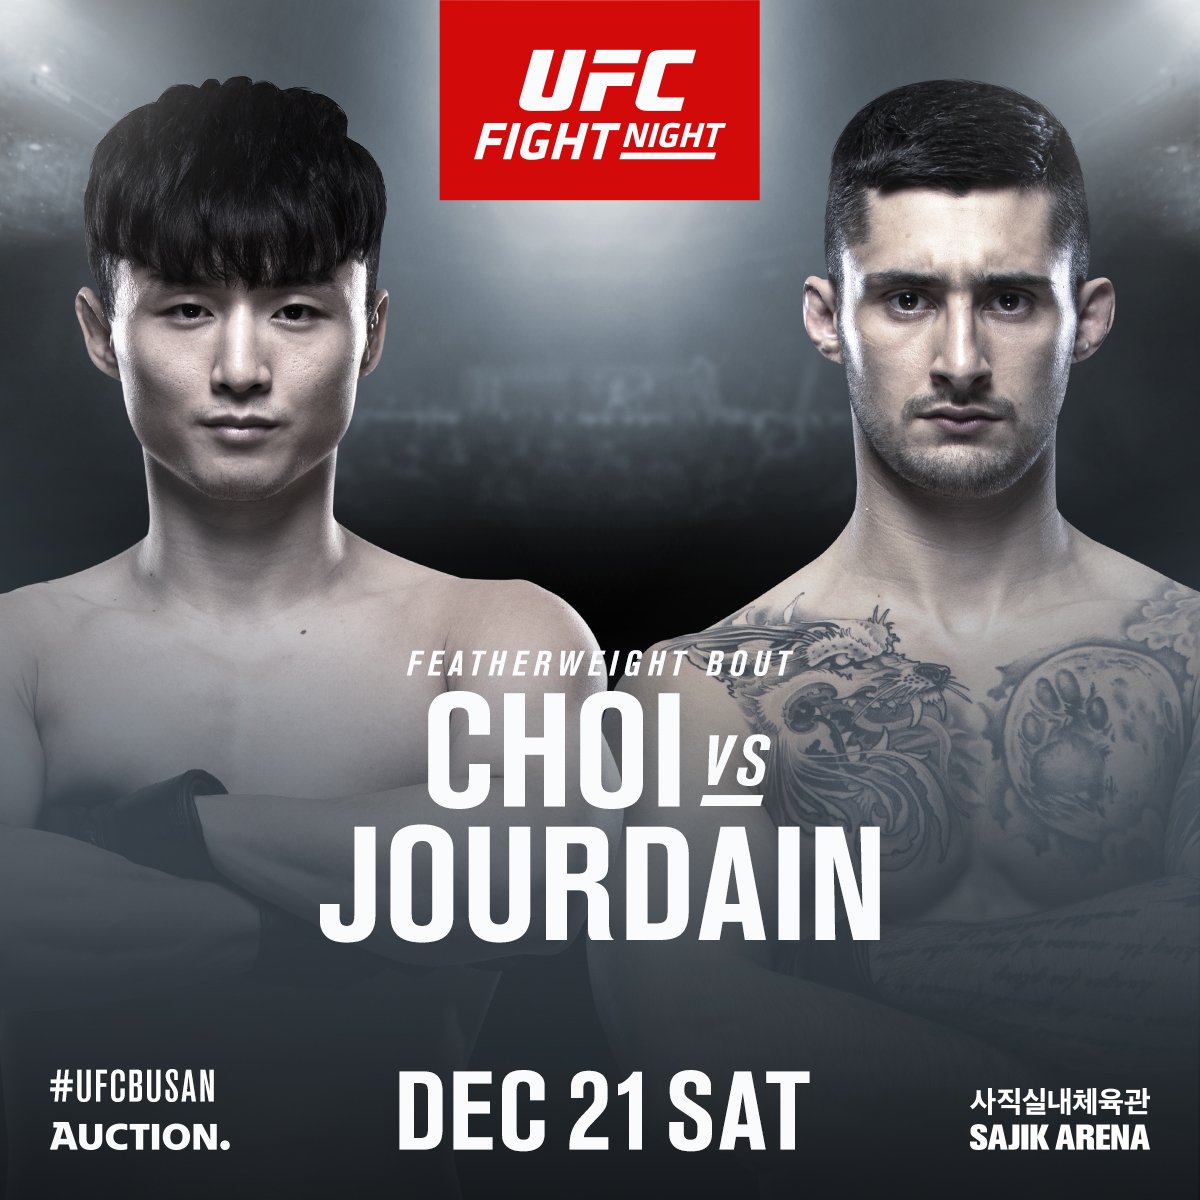 UFC Fight Night: Ortega vs The Korean Zombie tickets now on sale, featherweight bout Dooho Choi vs Charles Jourdain added - UFCBusan